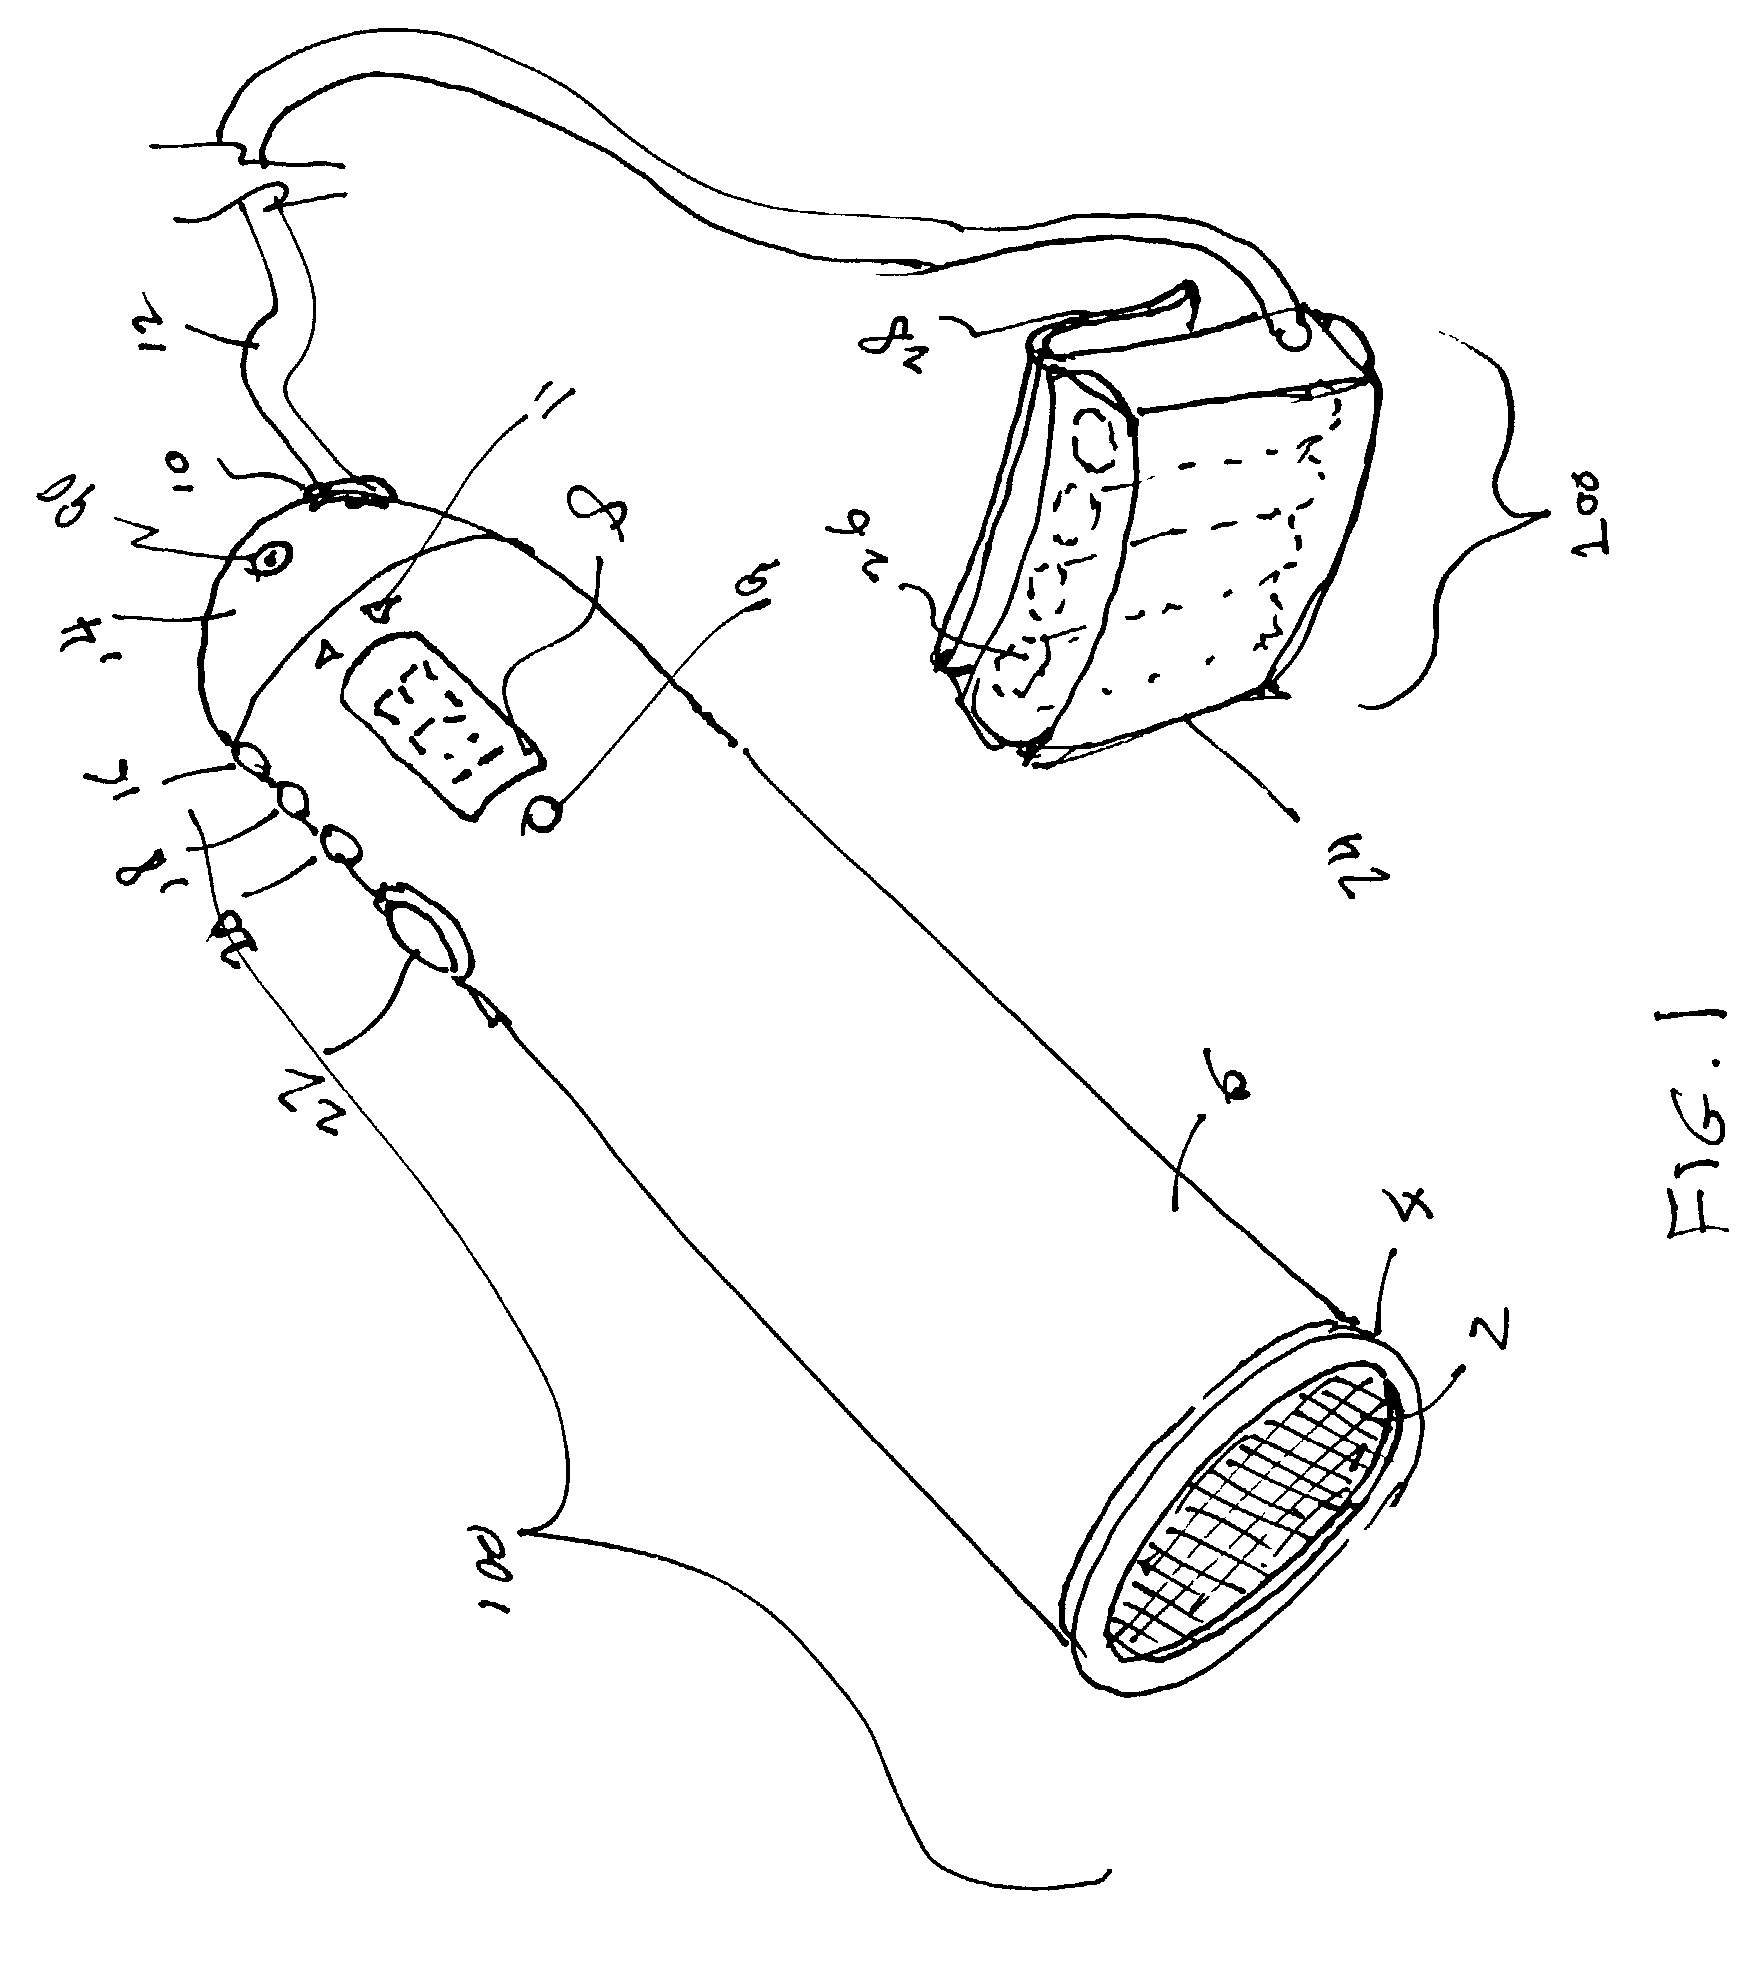 Pain relieving and healing device